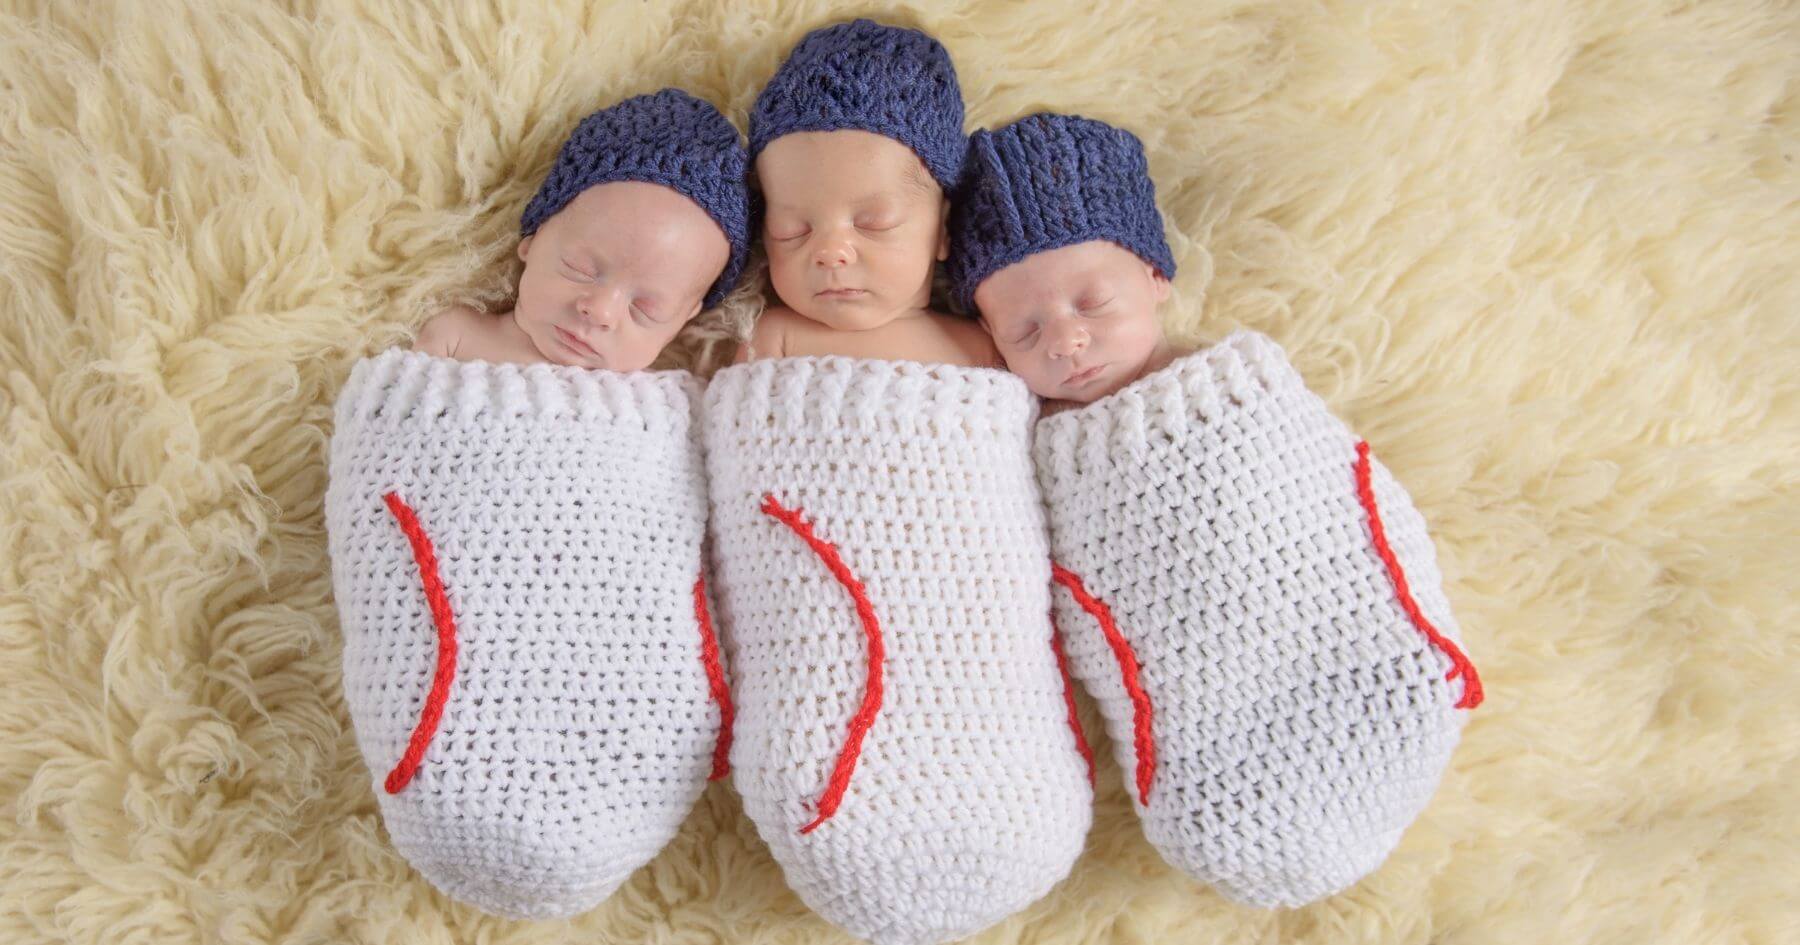 Ten-week premature, 1 in 200 million, identical triplets born to couple in Worcestershire